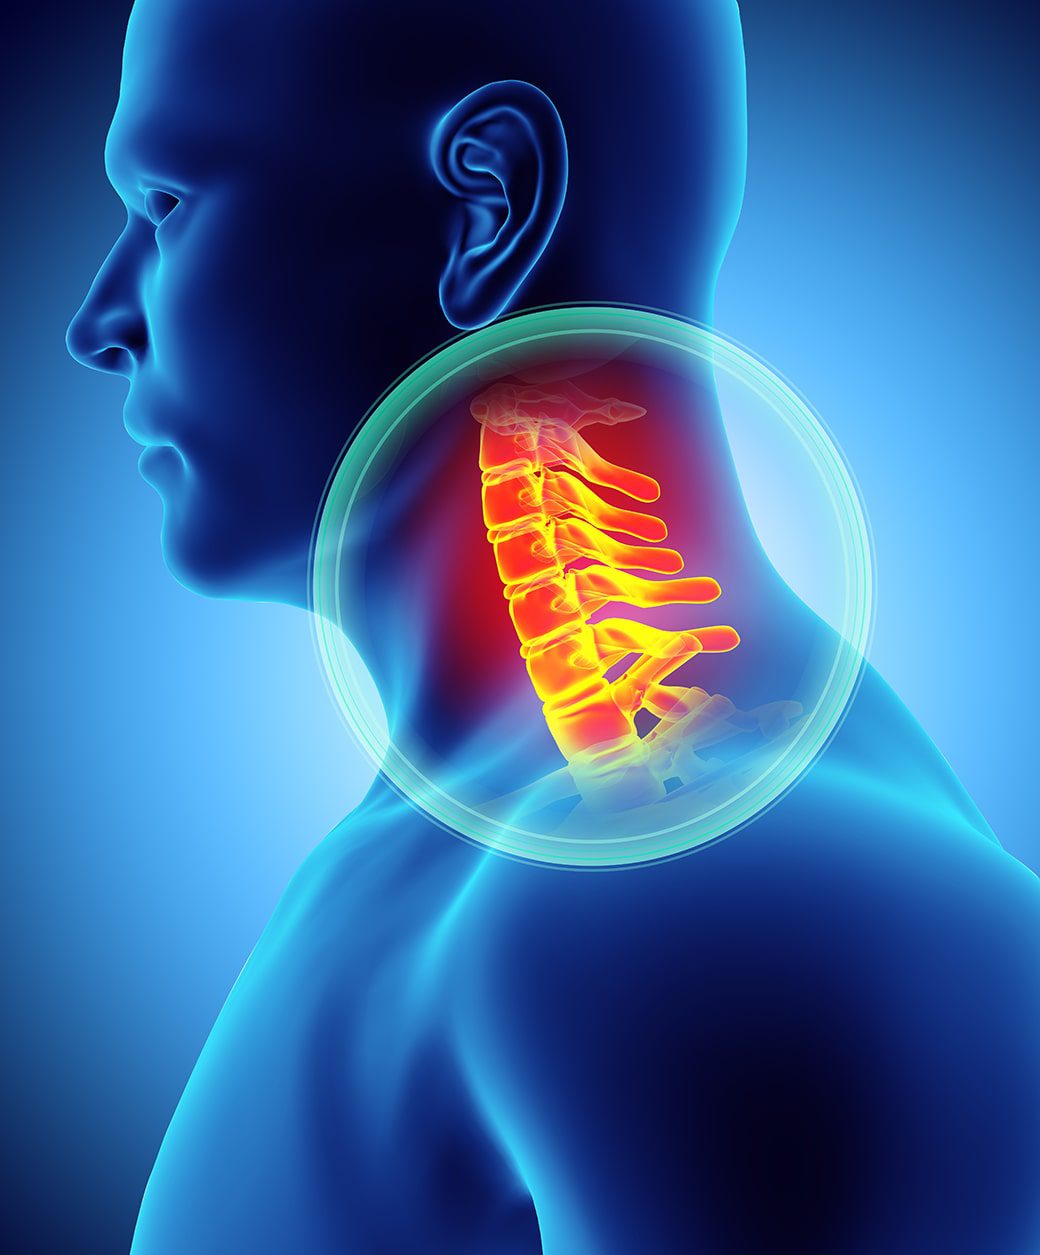 Should You Let a Chiropractor Adjust Your Neck?